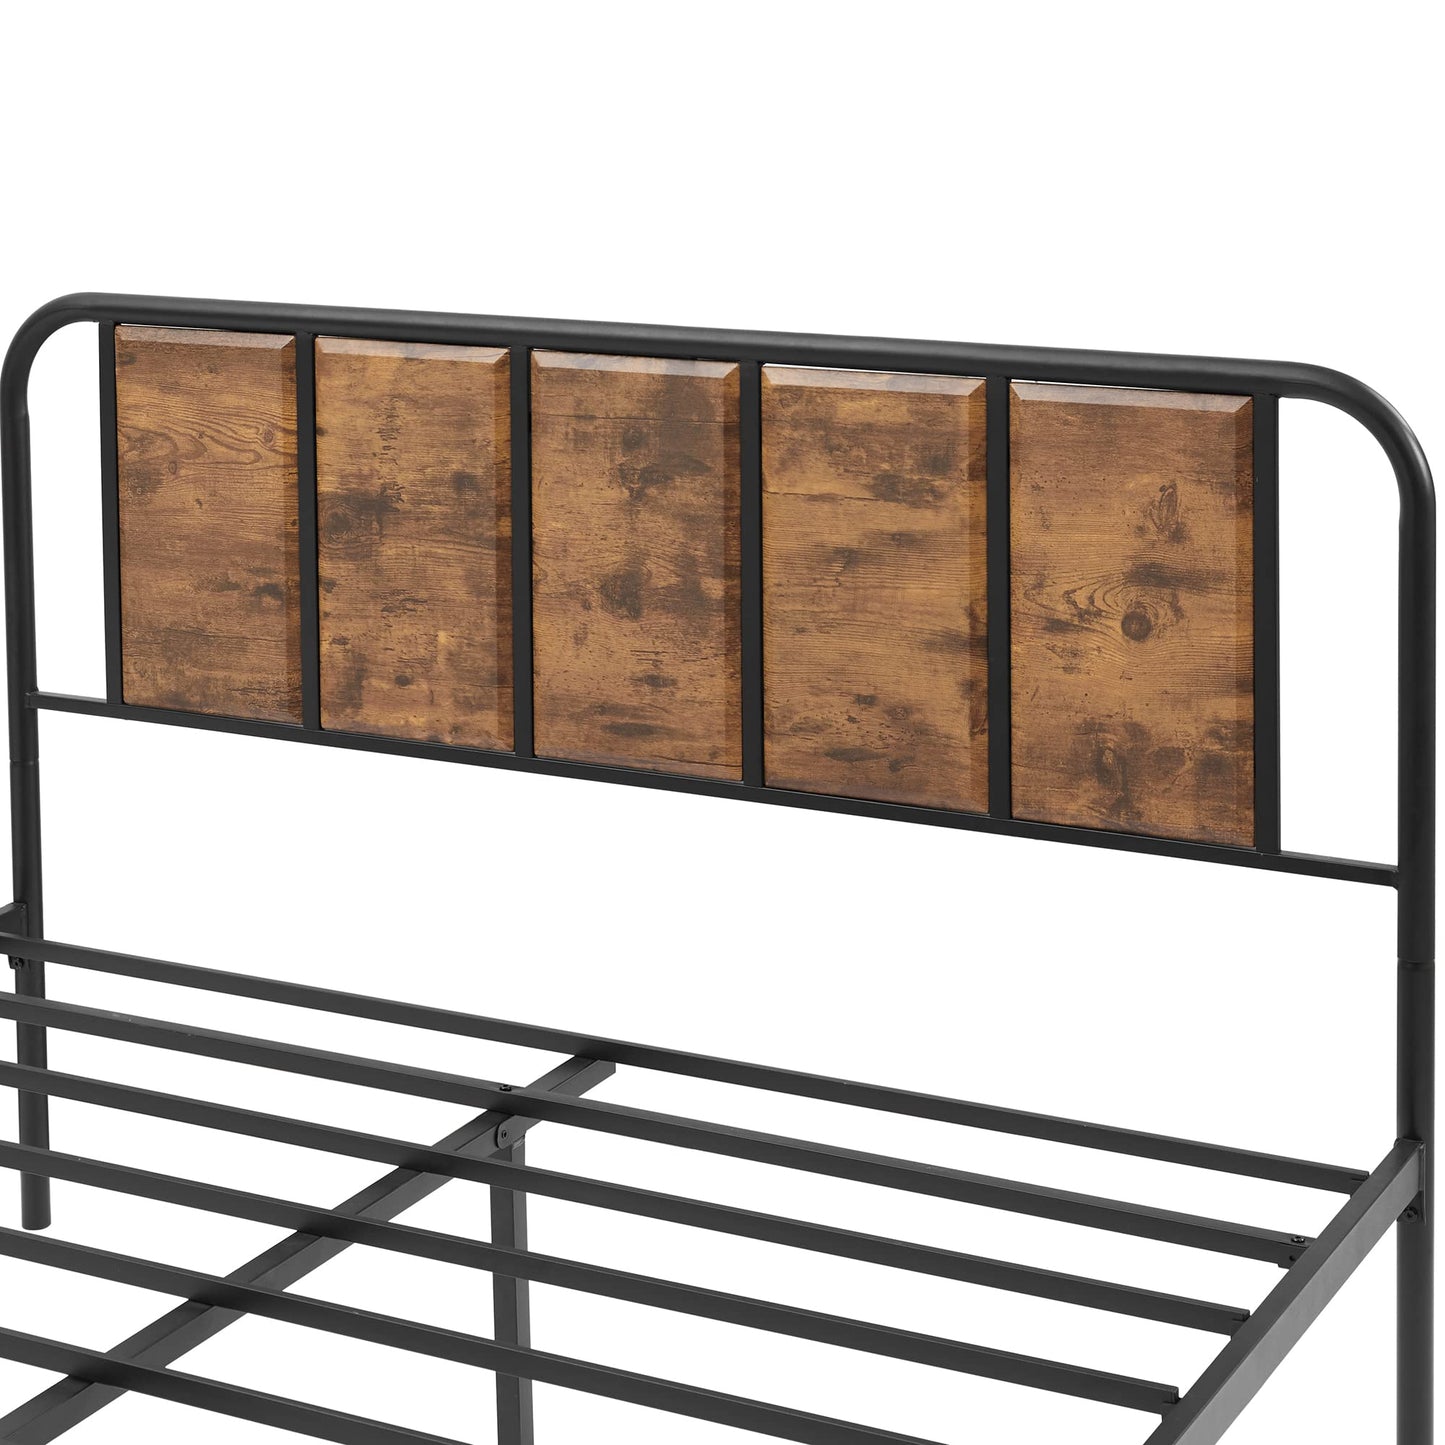 VECELO Queen Size Platform Bed Frame with Wooden Headboard,Sturdy Steel Slats Support/Matress Foudation/No Box Spring Needed(Brown)